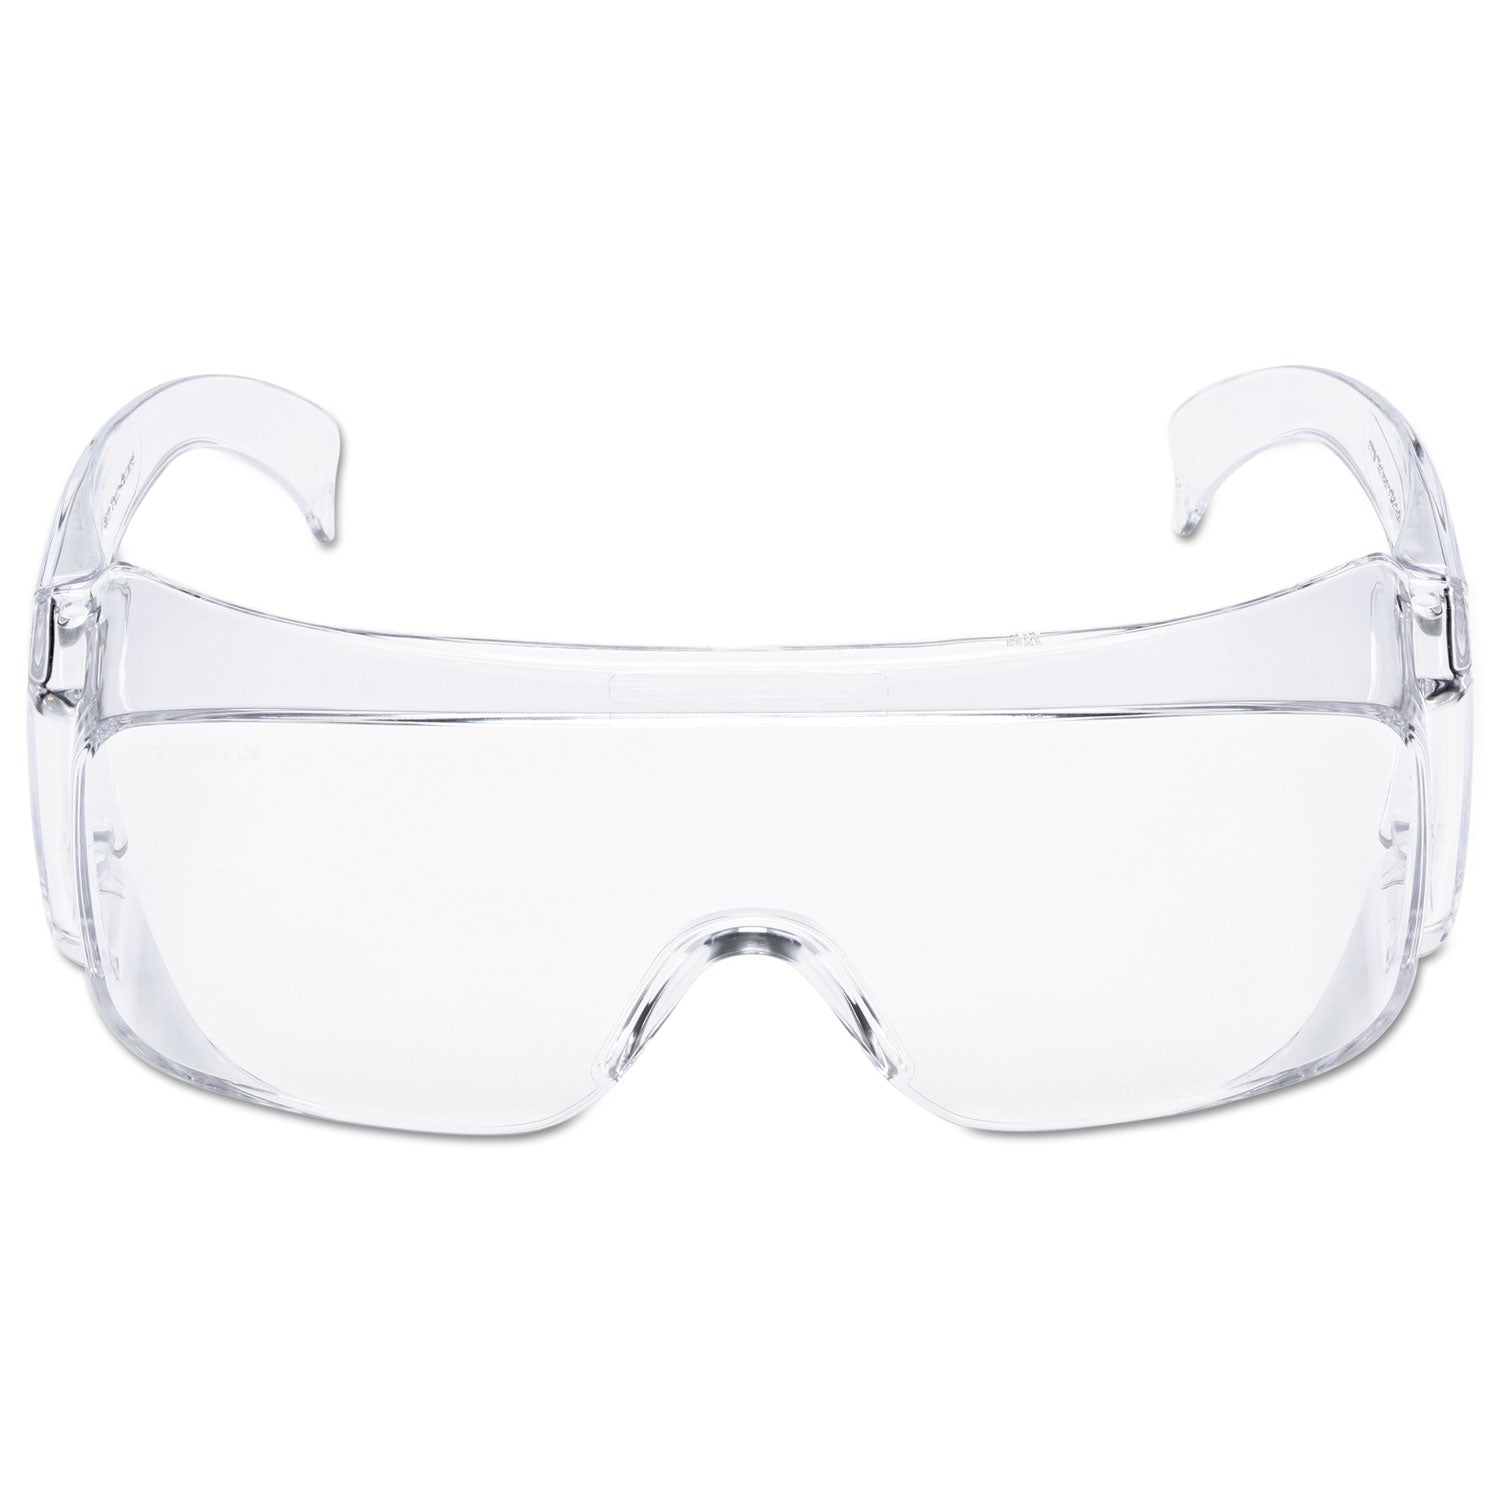 tour-guard-v-safety-glasses-one-size-fits-most-clear-frame-lens-20-box_mmmtgv0120 - 2